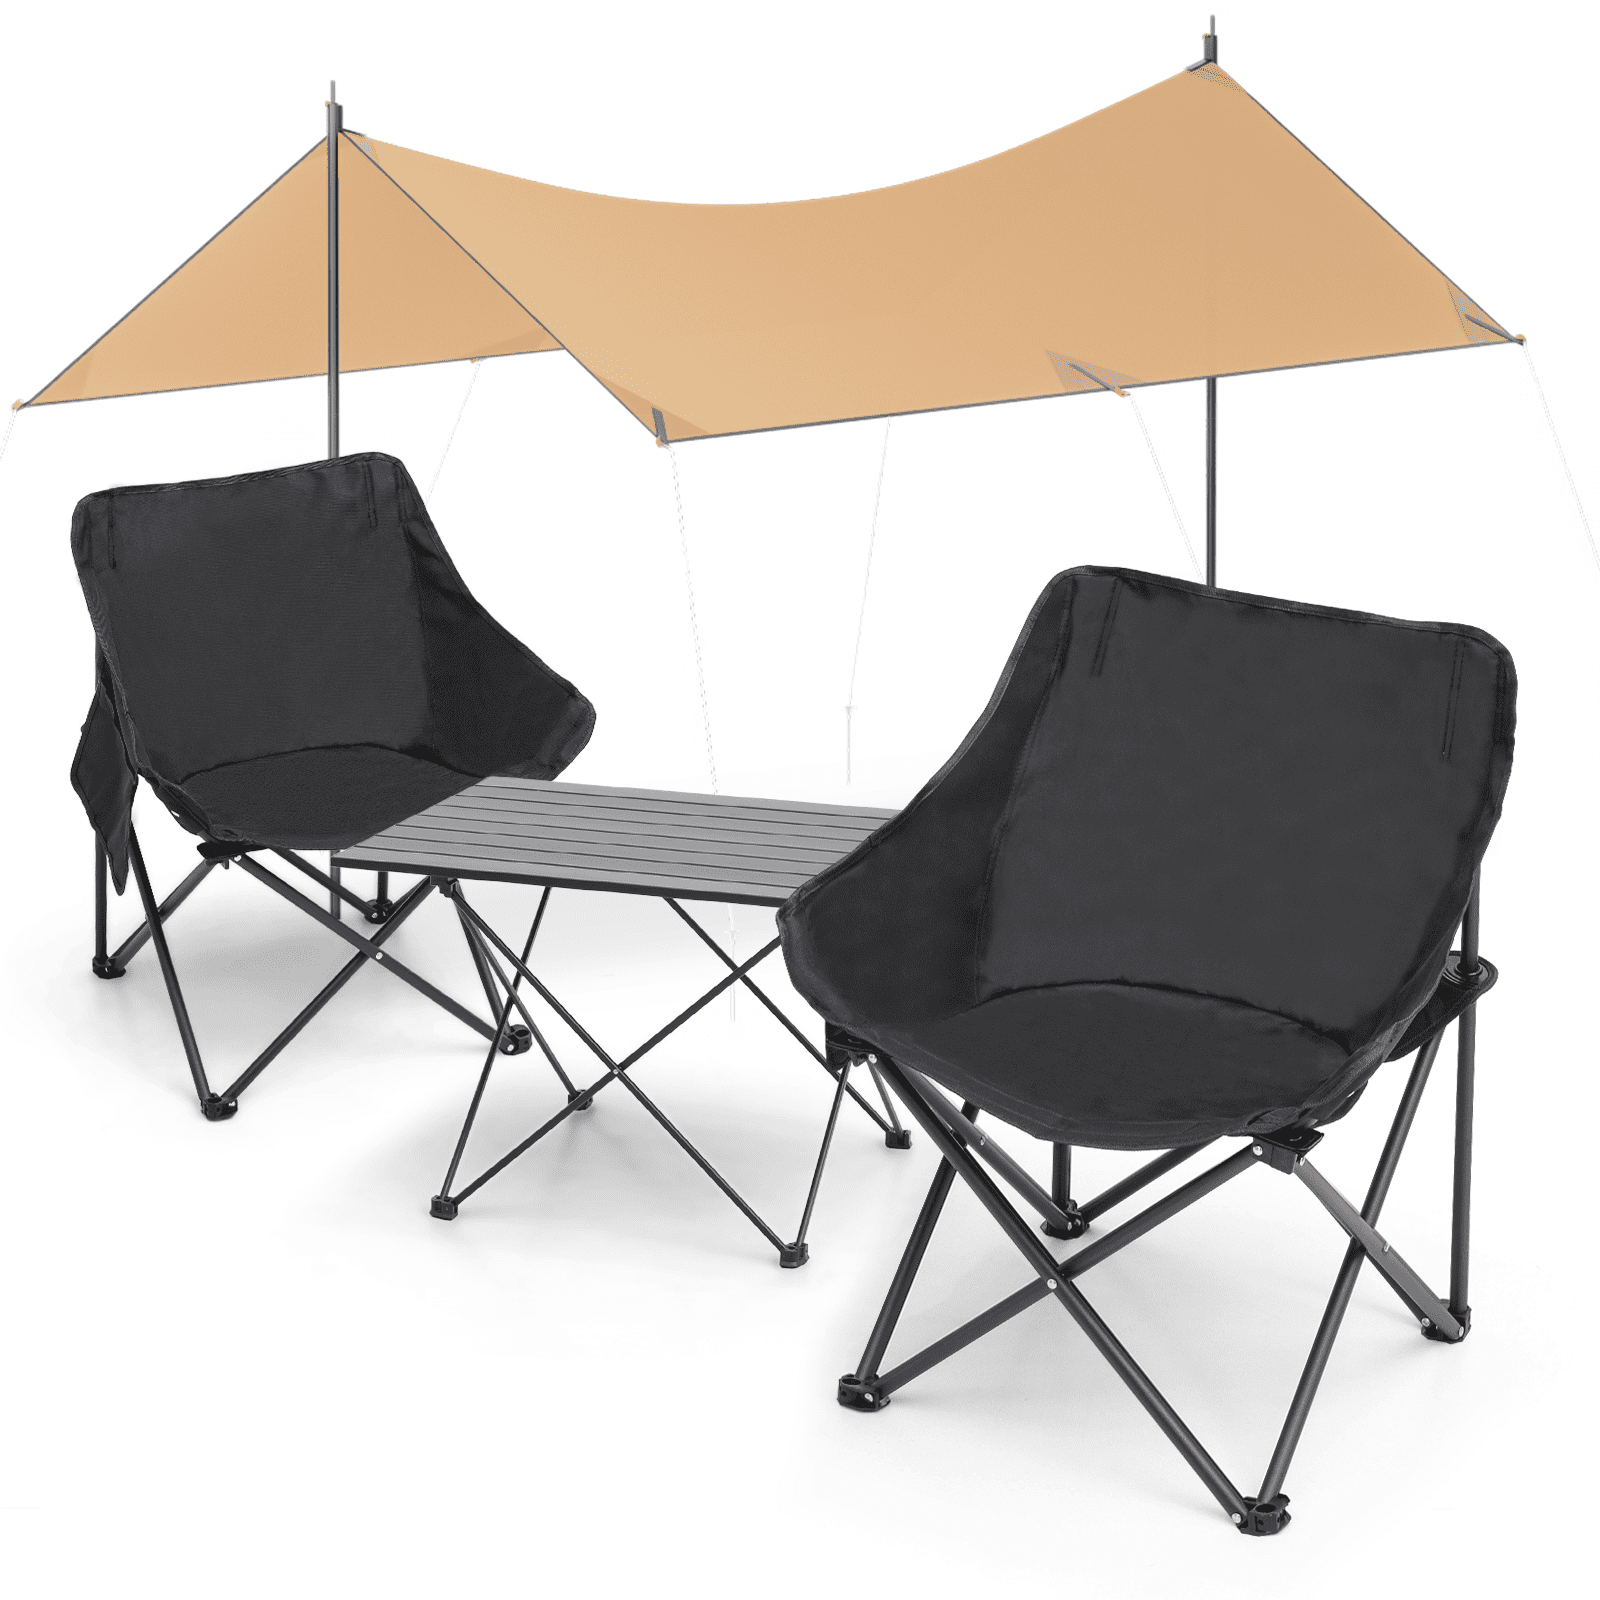 MADOG Set of 4 Camping Tent Tarp + Chairs + Table, 10 Person Tent Shelter  with 2 Foldable Camping Chairs and Roll Up Table Set for Backpacking